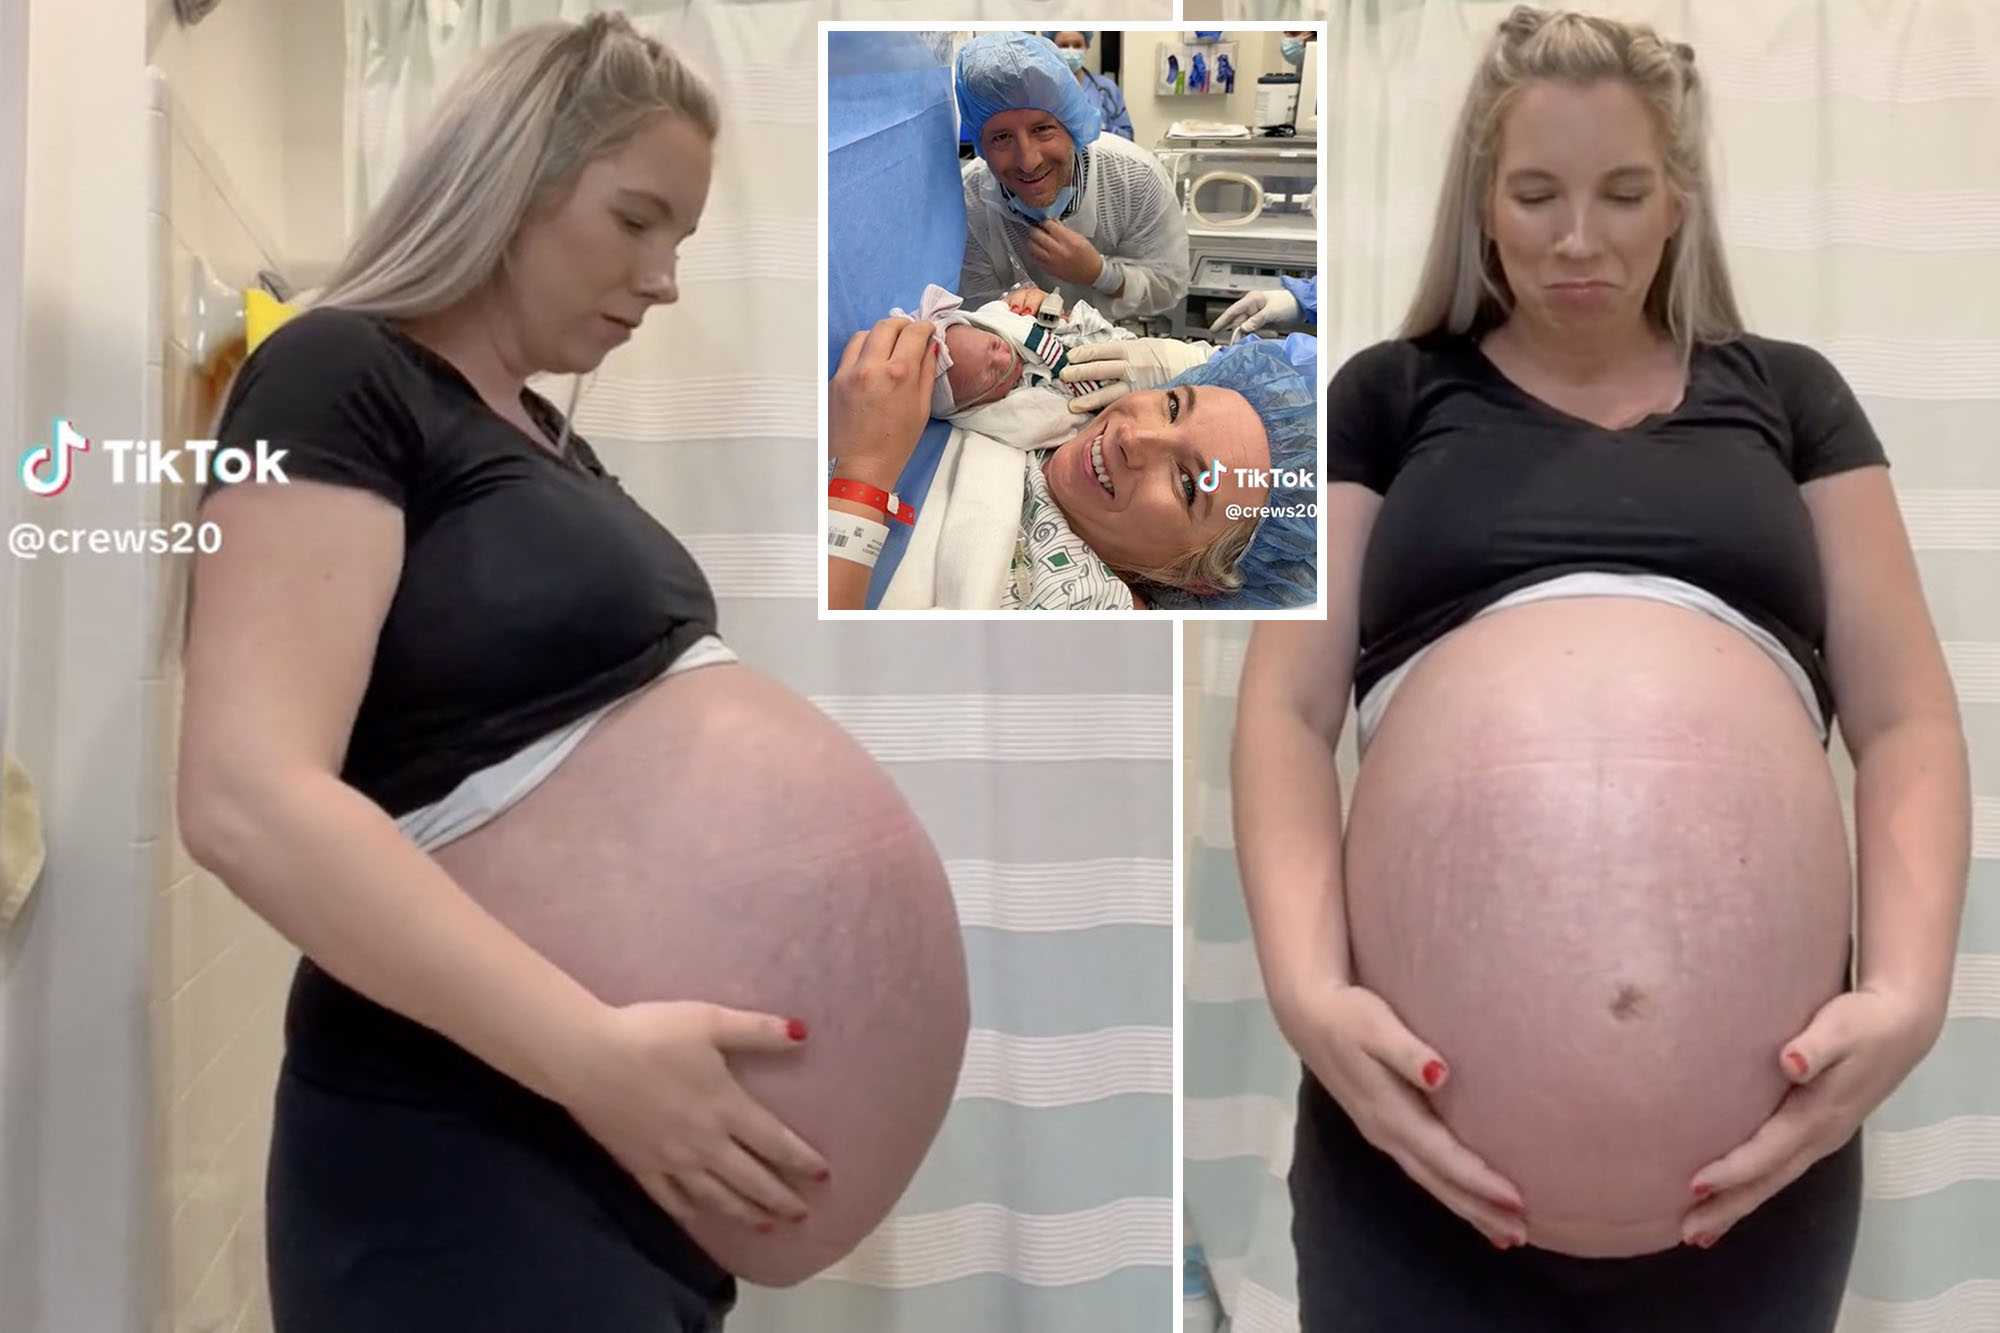 cornell lancaster recommends pregnant bellies with triplets pic